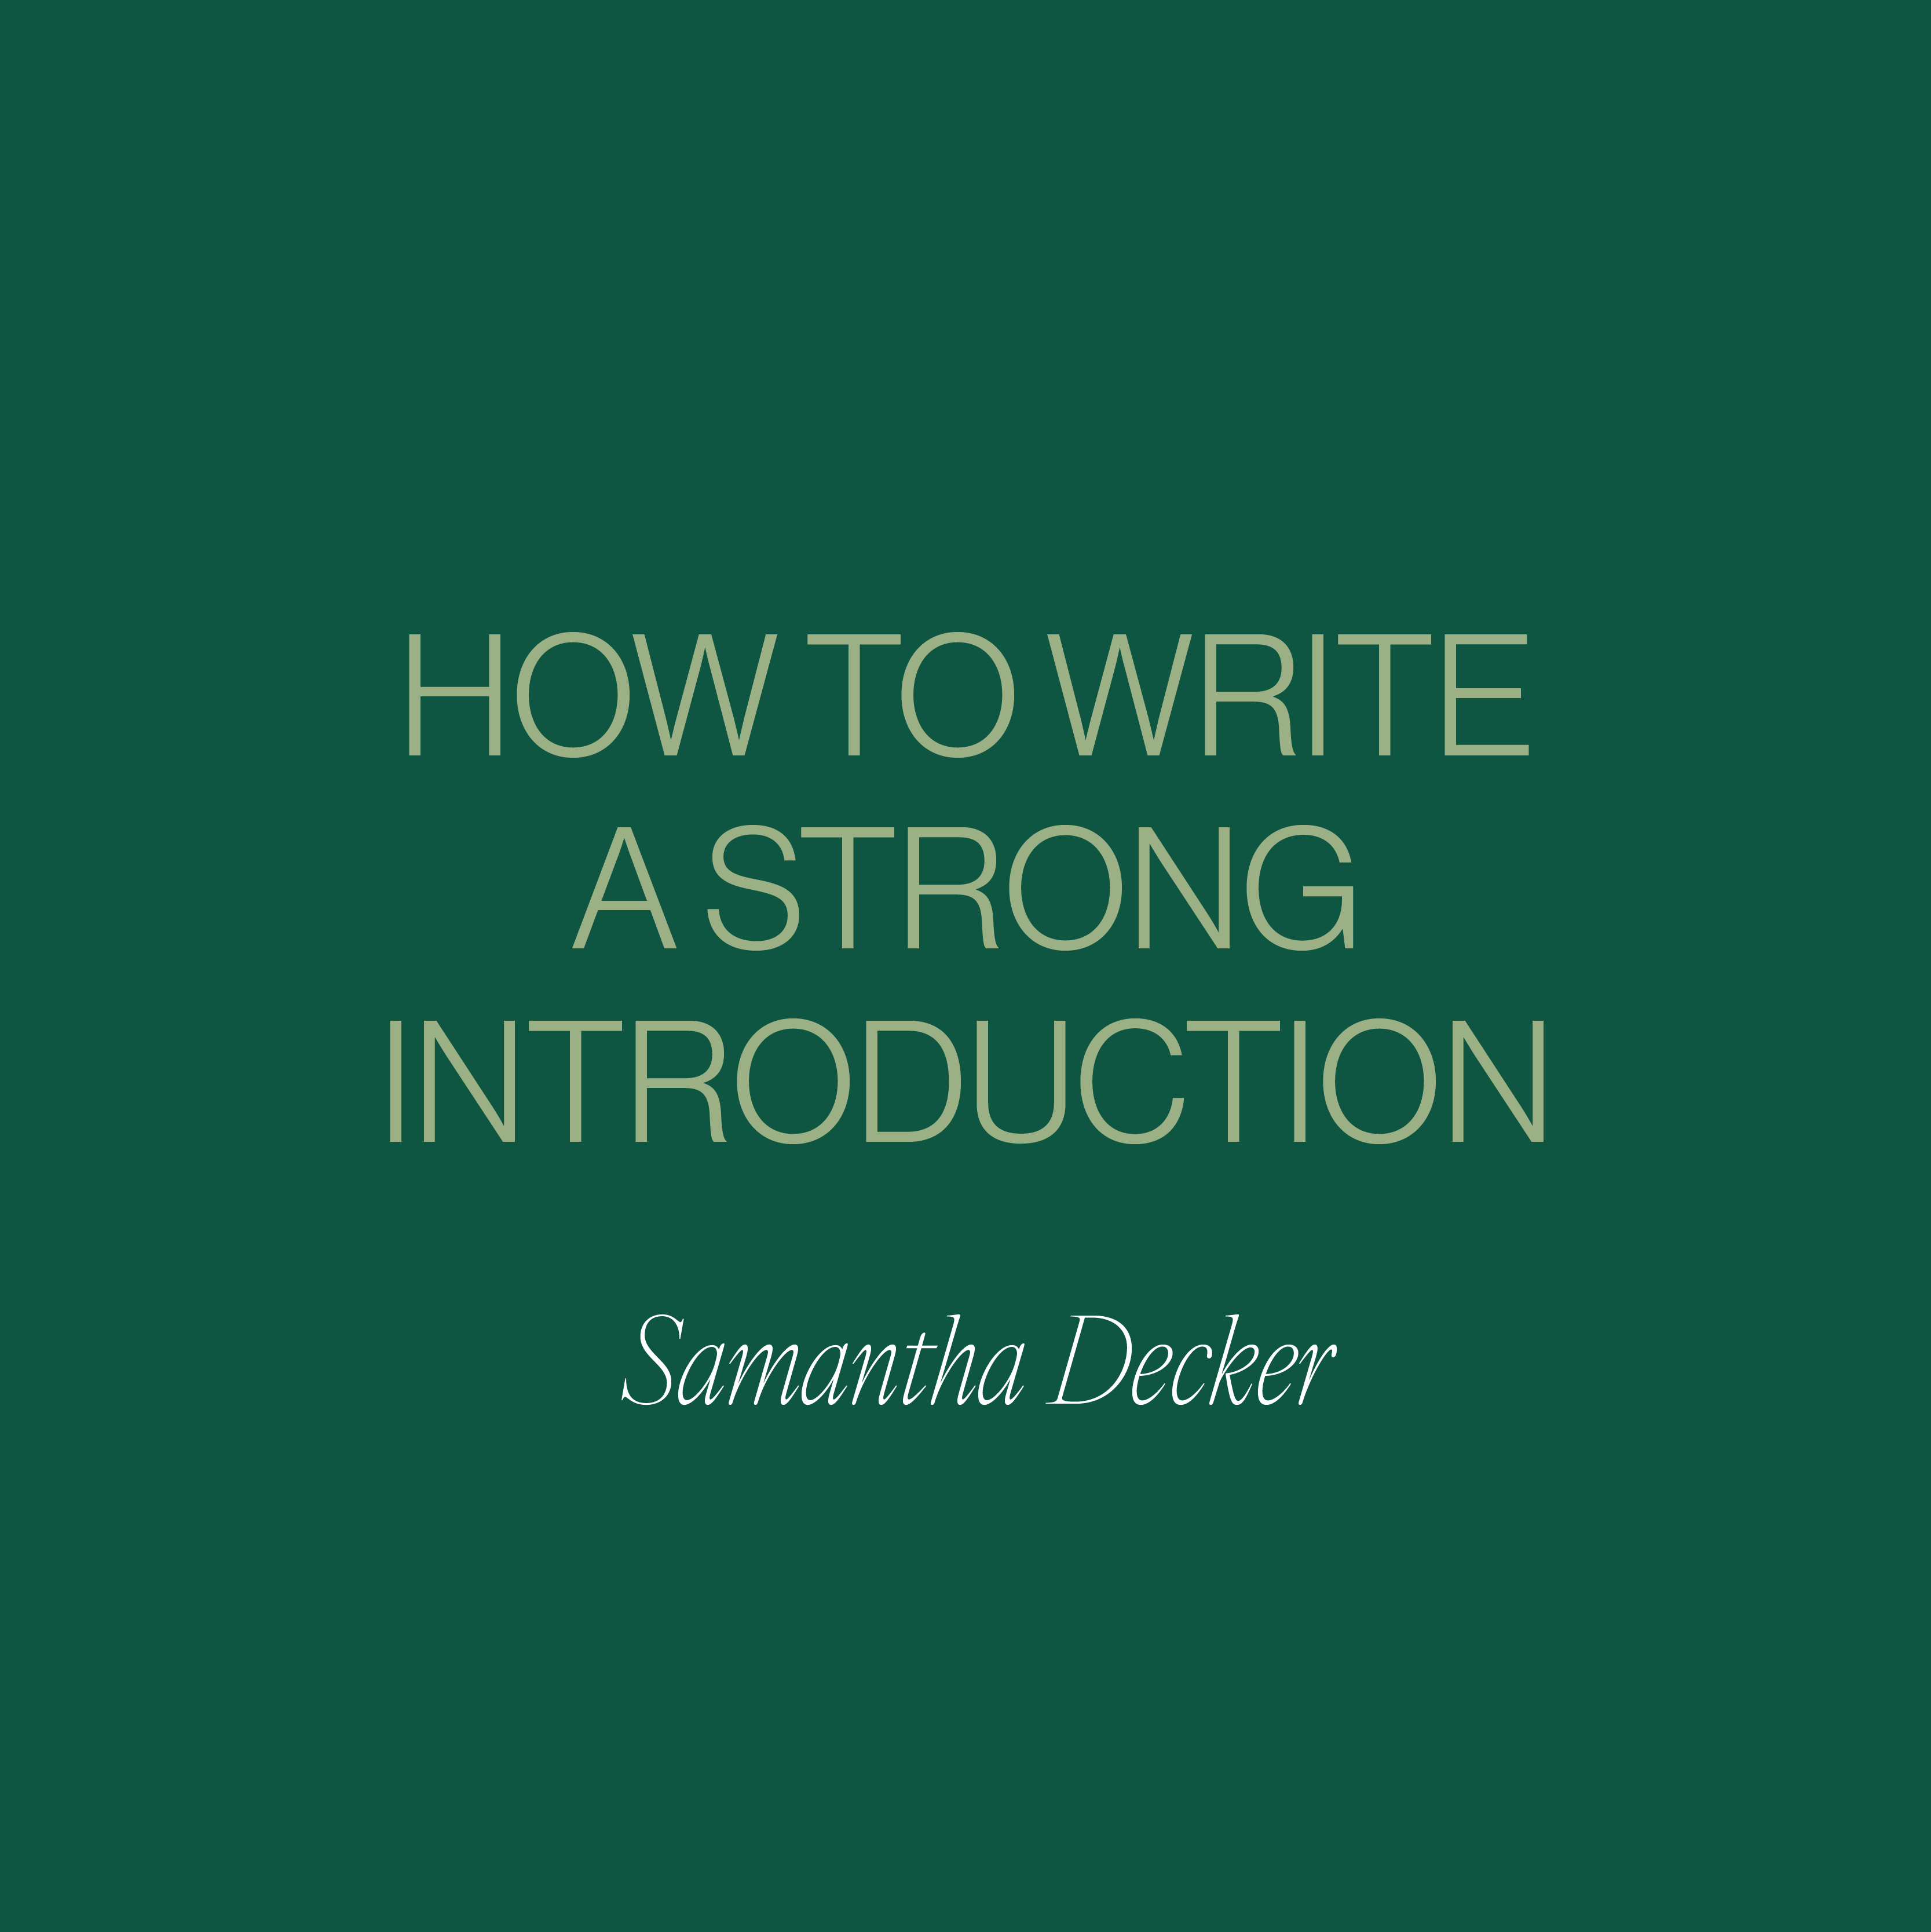 Writing an introduction can be the most challenging part of writing. Don’t let that stop you. Here are three ways to help you overcome the blinking cursor and write a stellar introduction today!